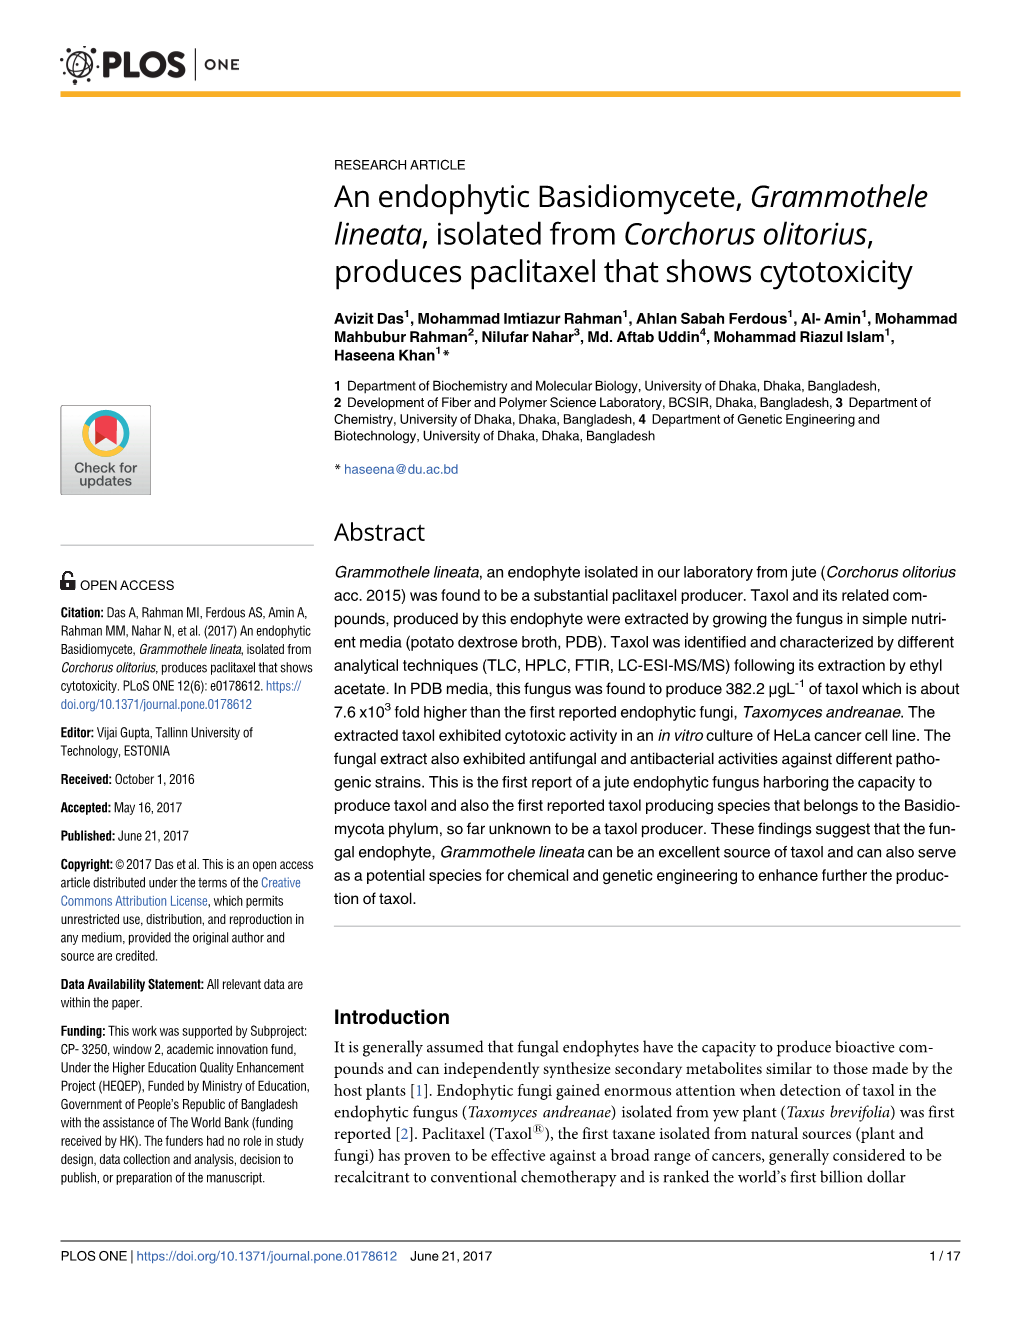 An Endophytic Basidiomycete, Grammothele Lineata, Isolated from Corchorus Olitorius, Produces Paclitaxel That Shows Cytotoxicity